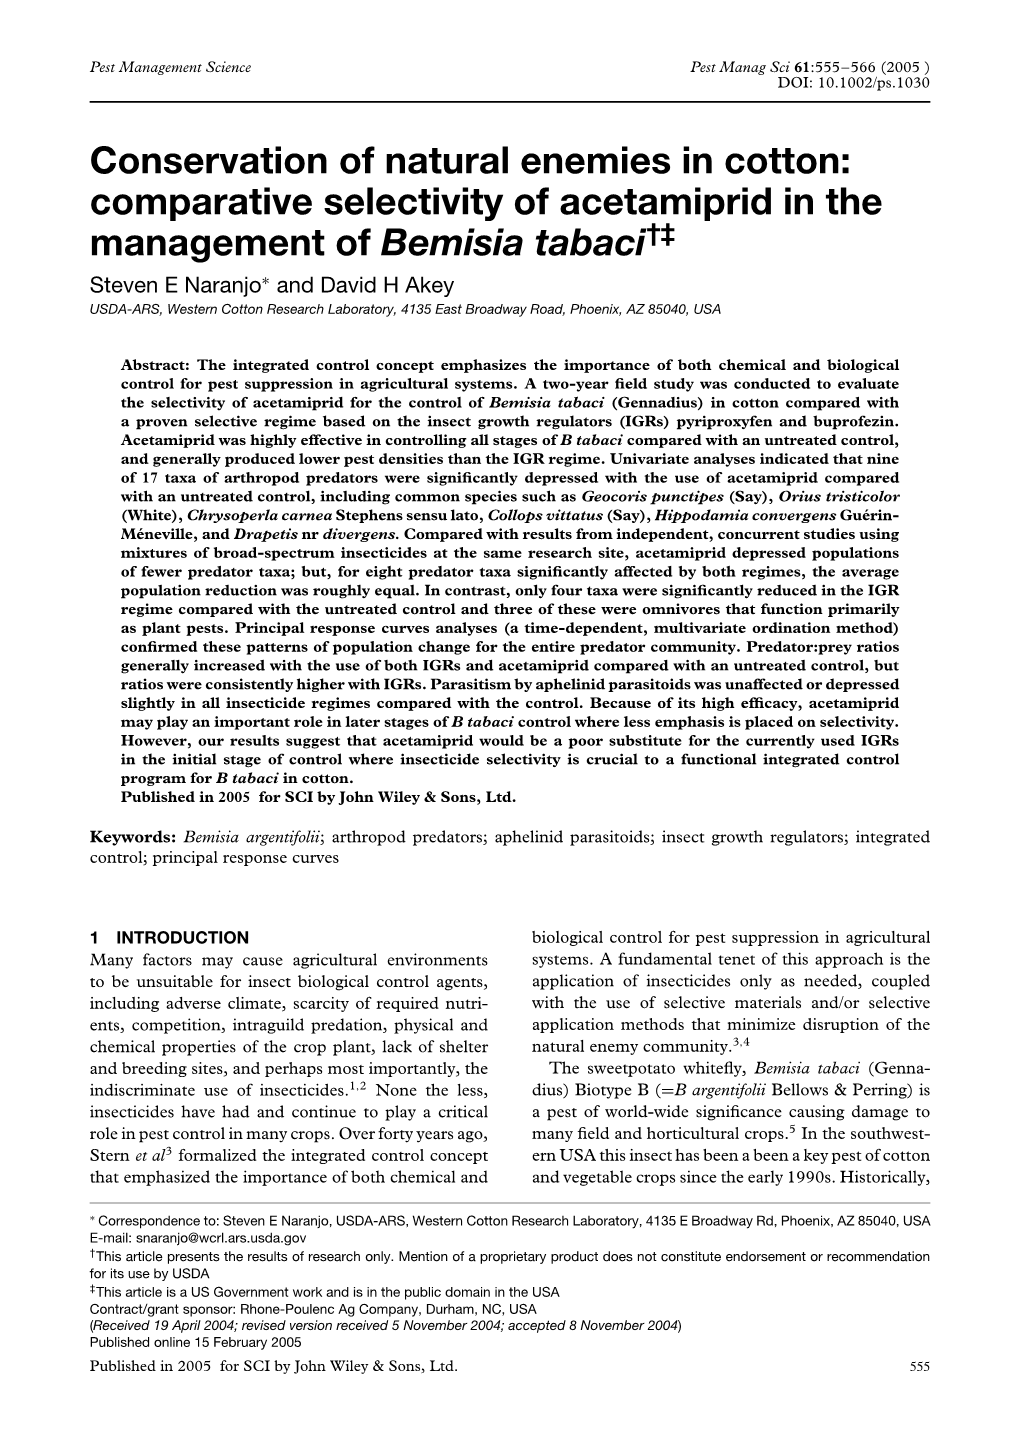 Comparative Selectivity of Acetamiprid in the Management Of